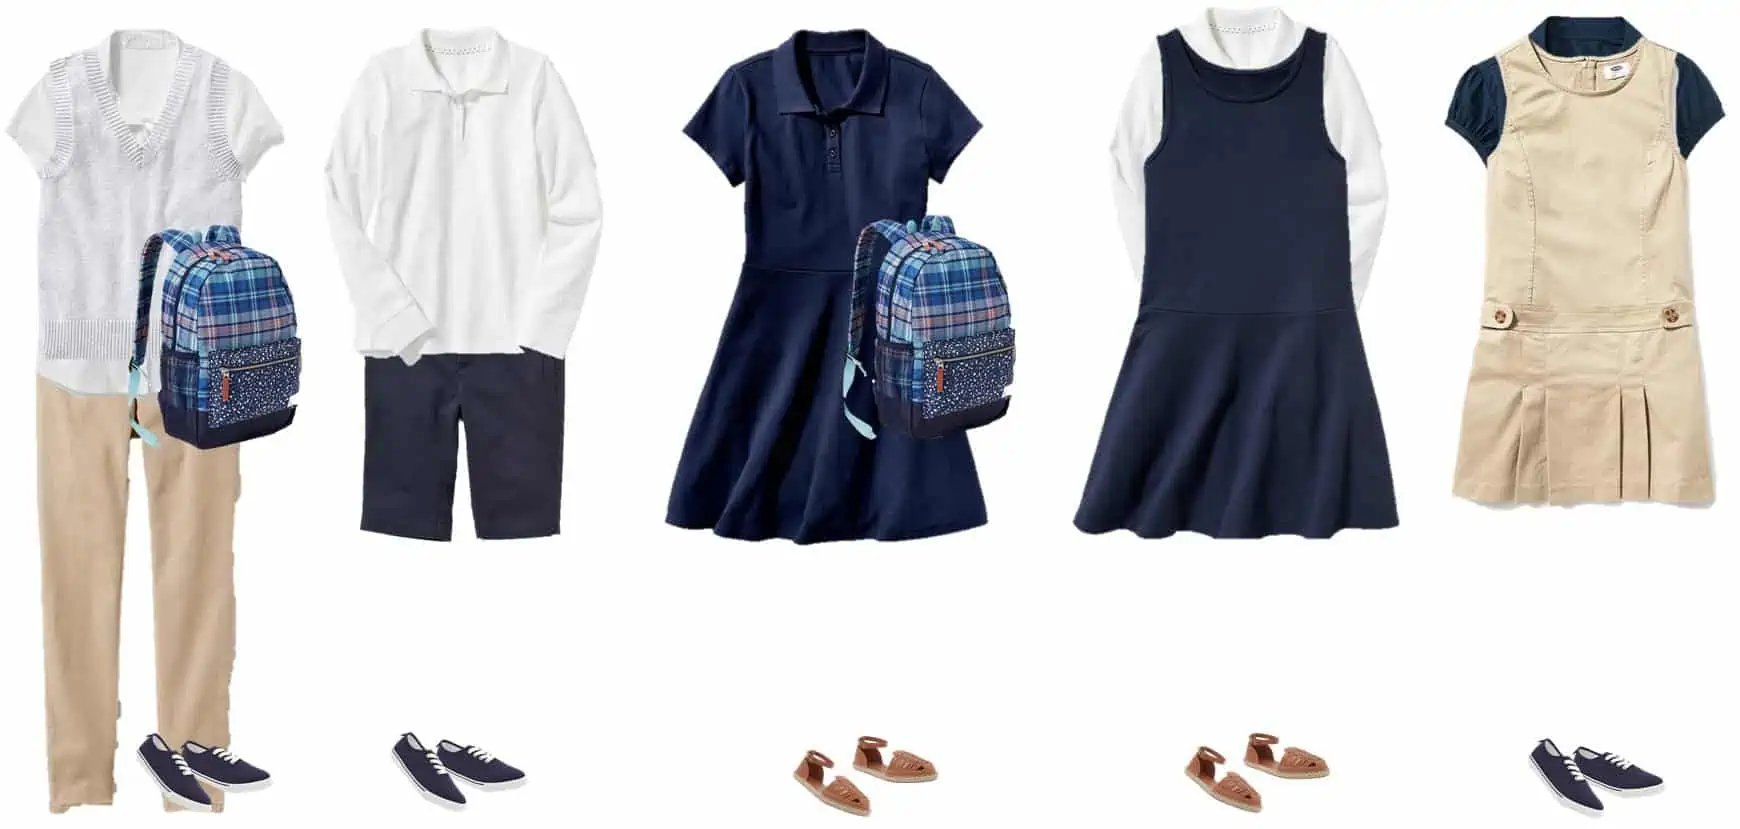 Mix & Match School Uniforms for Girls from Old Navy